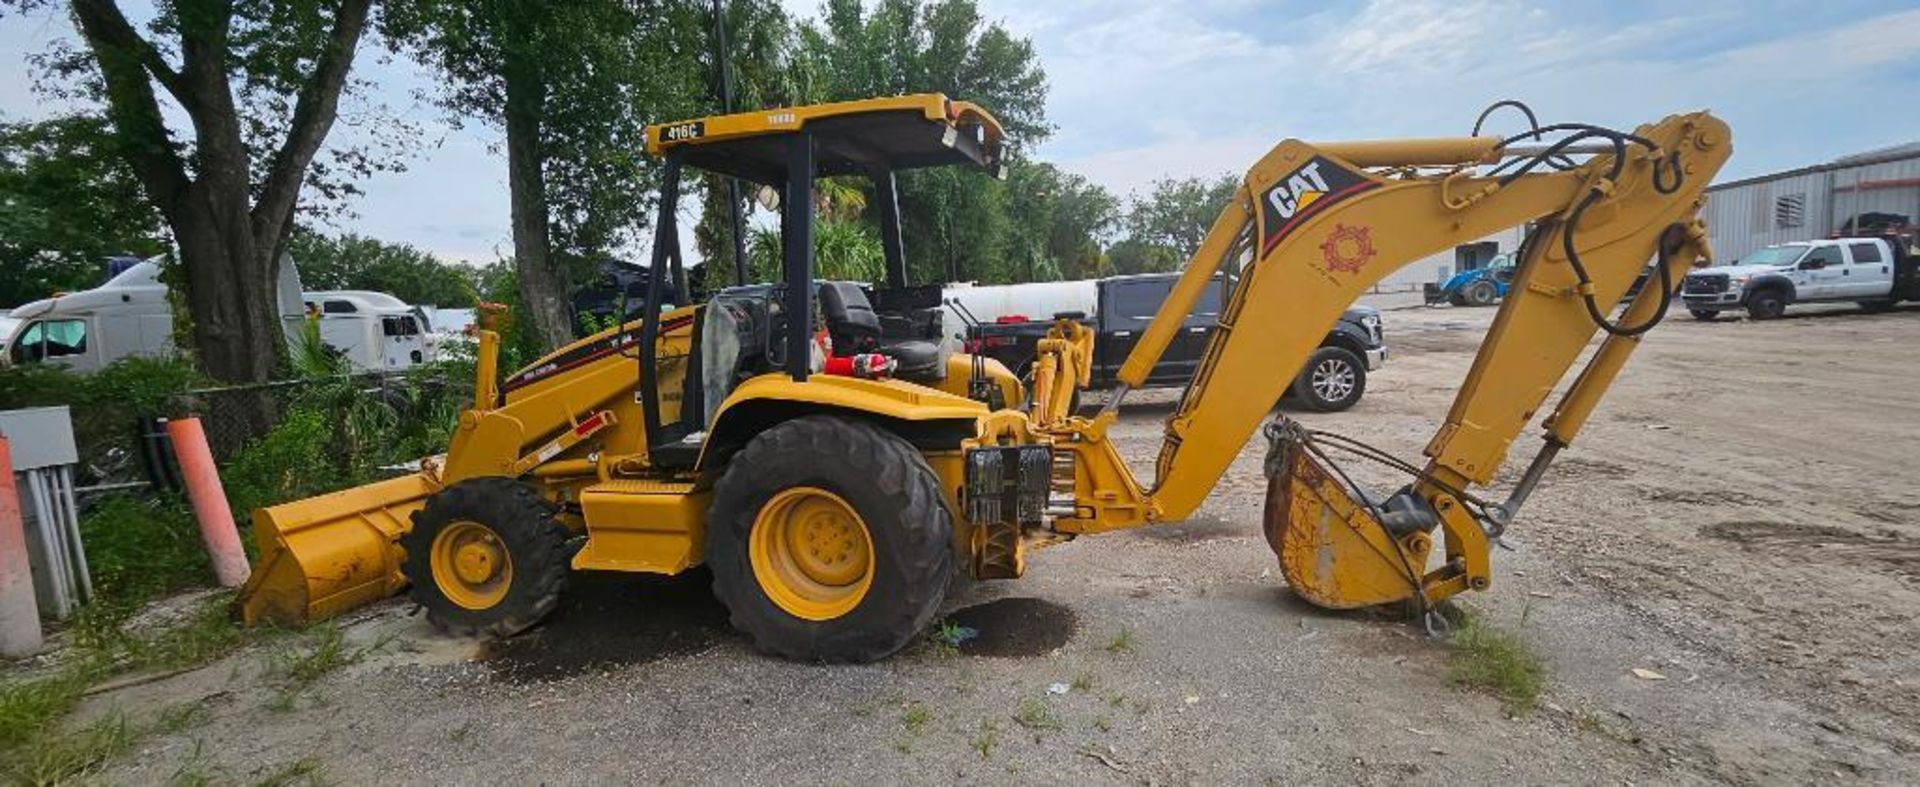 2000 Caterpillar 416C Backhoe, Turbo 4 X 4, Extendahoe, S/N 42N210581, 3,029 Hours (Located at 5910 - Image 7 of 7